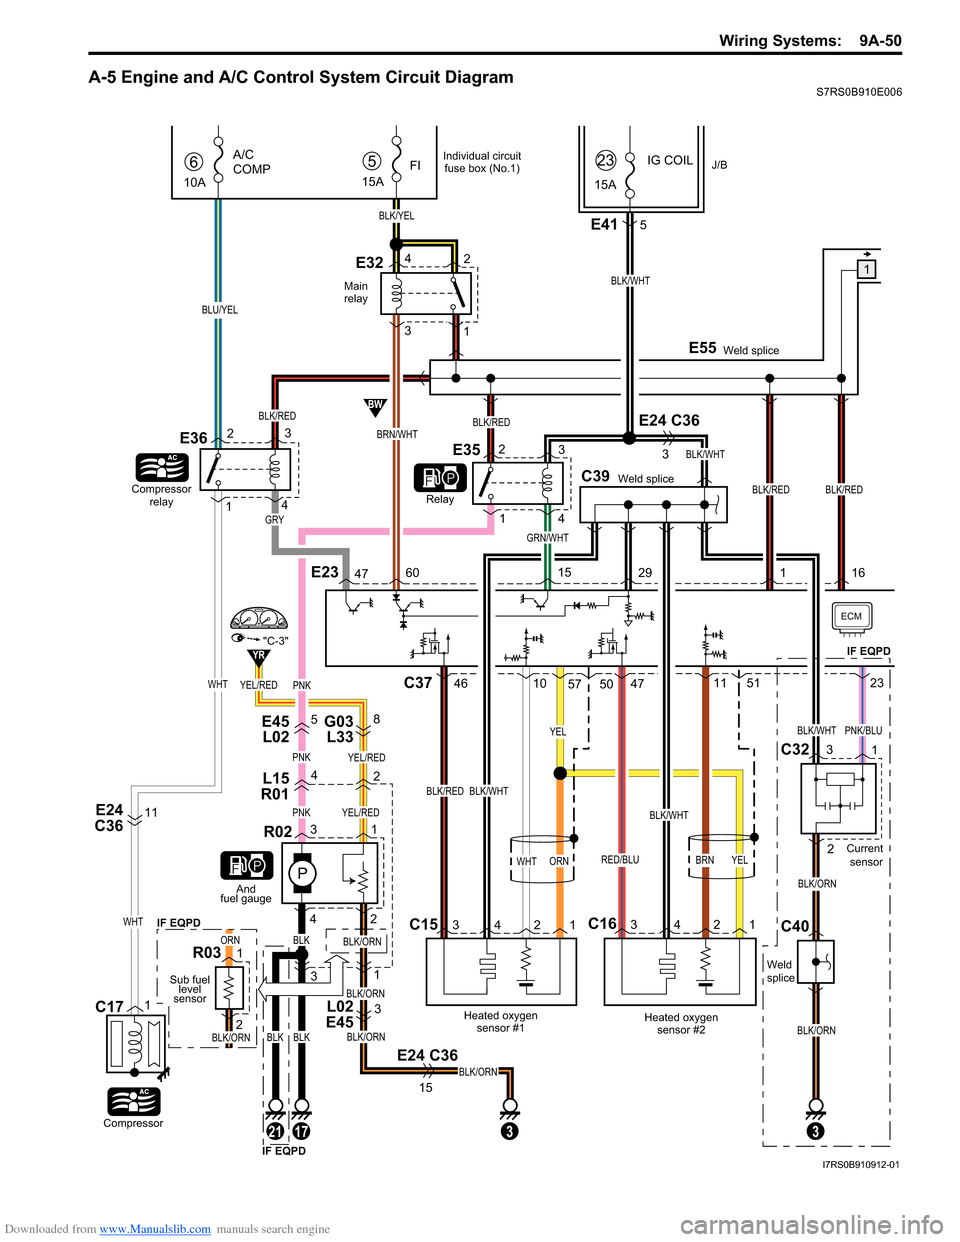 SUZUKI SWIFT 2005 2.G Service Workshop Manual Downloaded from www.Manualslib.com manuals search engine Wiring Systems:  9A-50
A-5 Engine and A/C Control System Circuit DiagramS7RS0B910E006
YEL/RED
E45L02 G03 
L33
L02 
E4558
L15
R0142
PNKYEL/RED
P